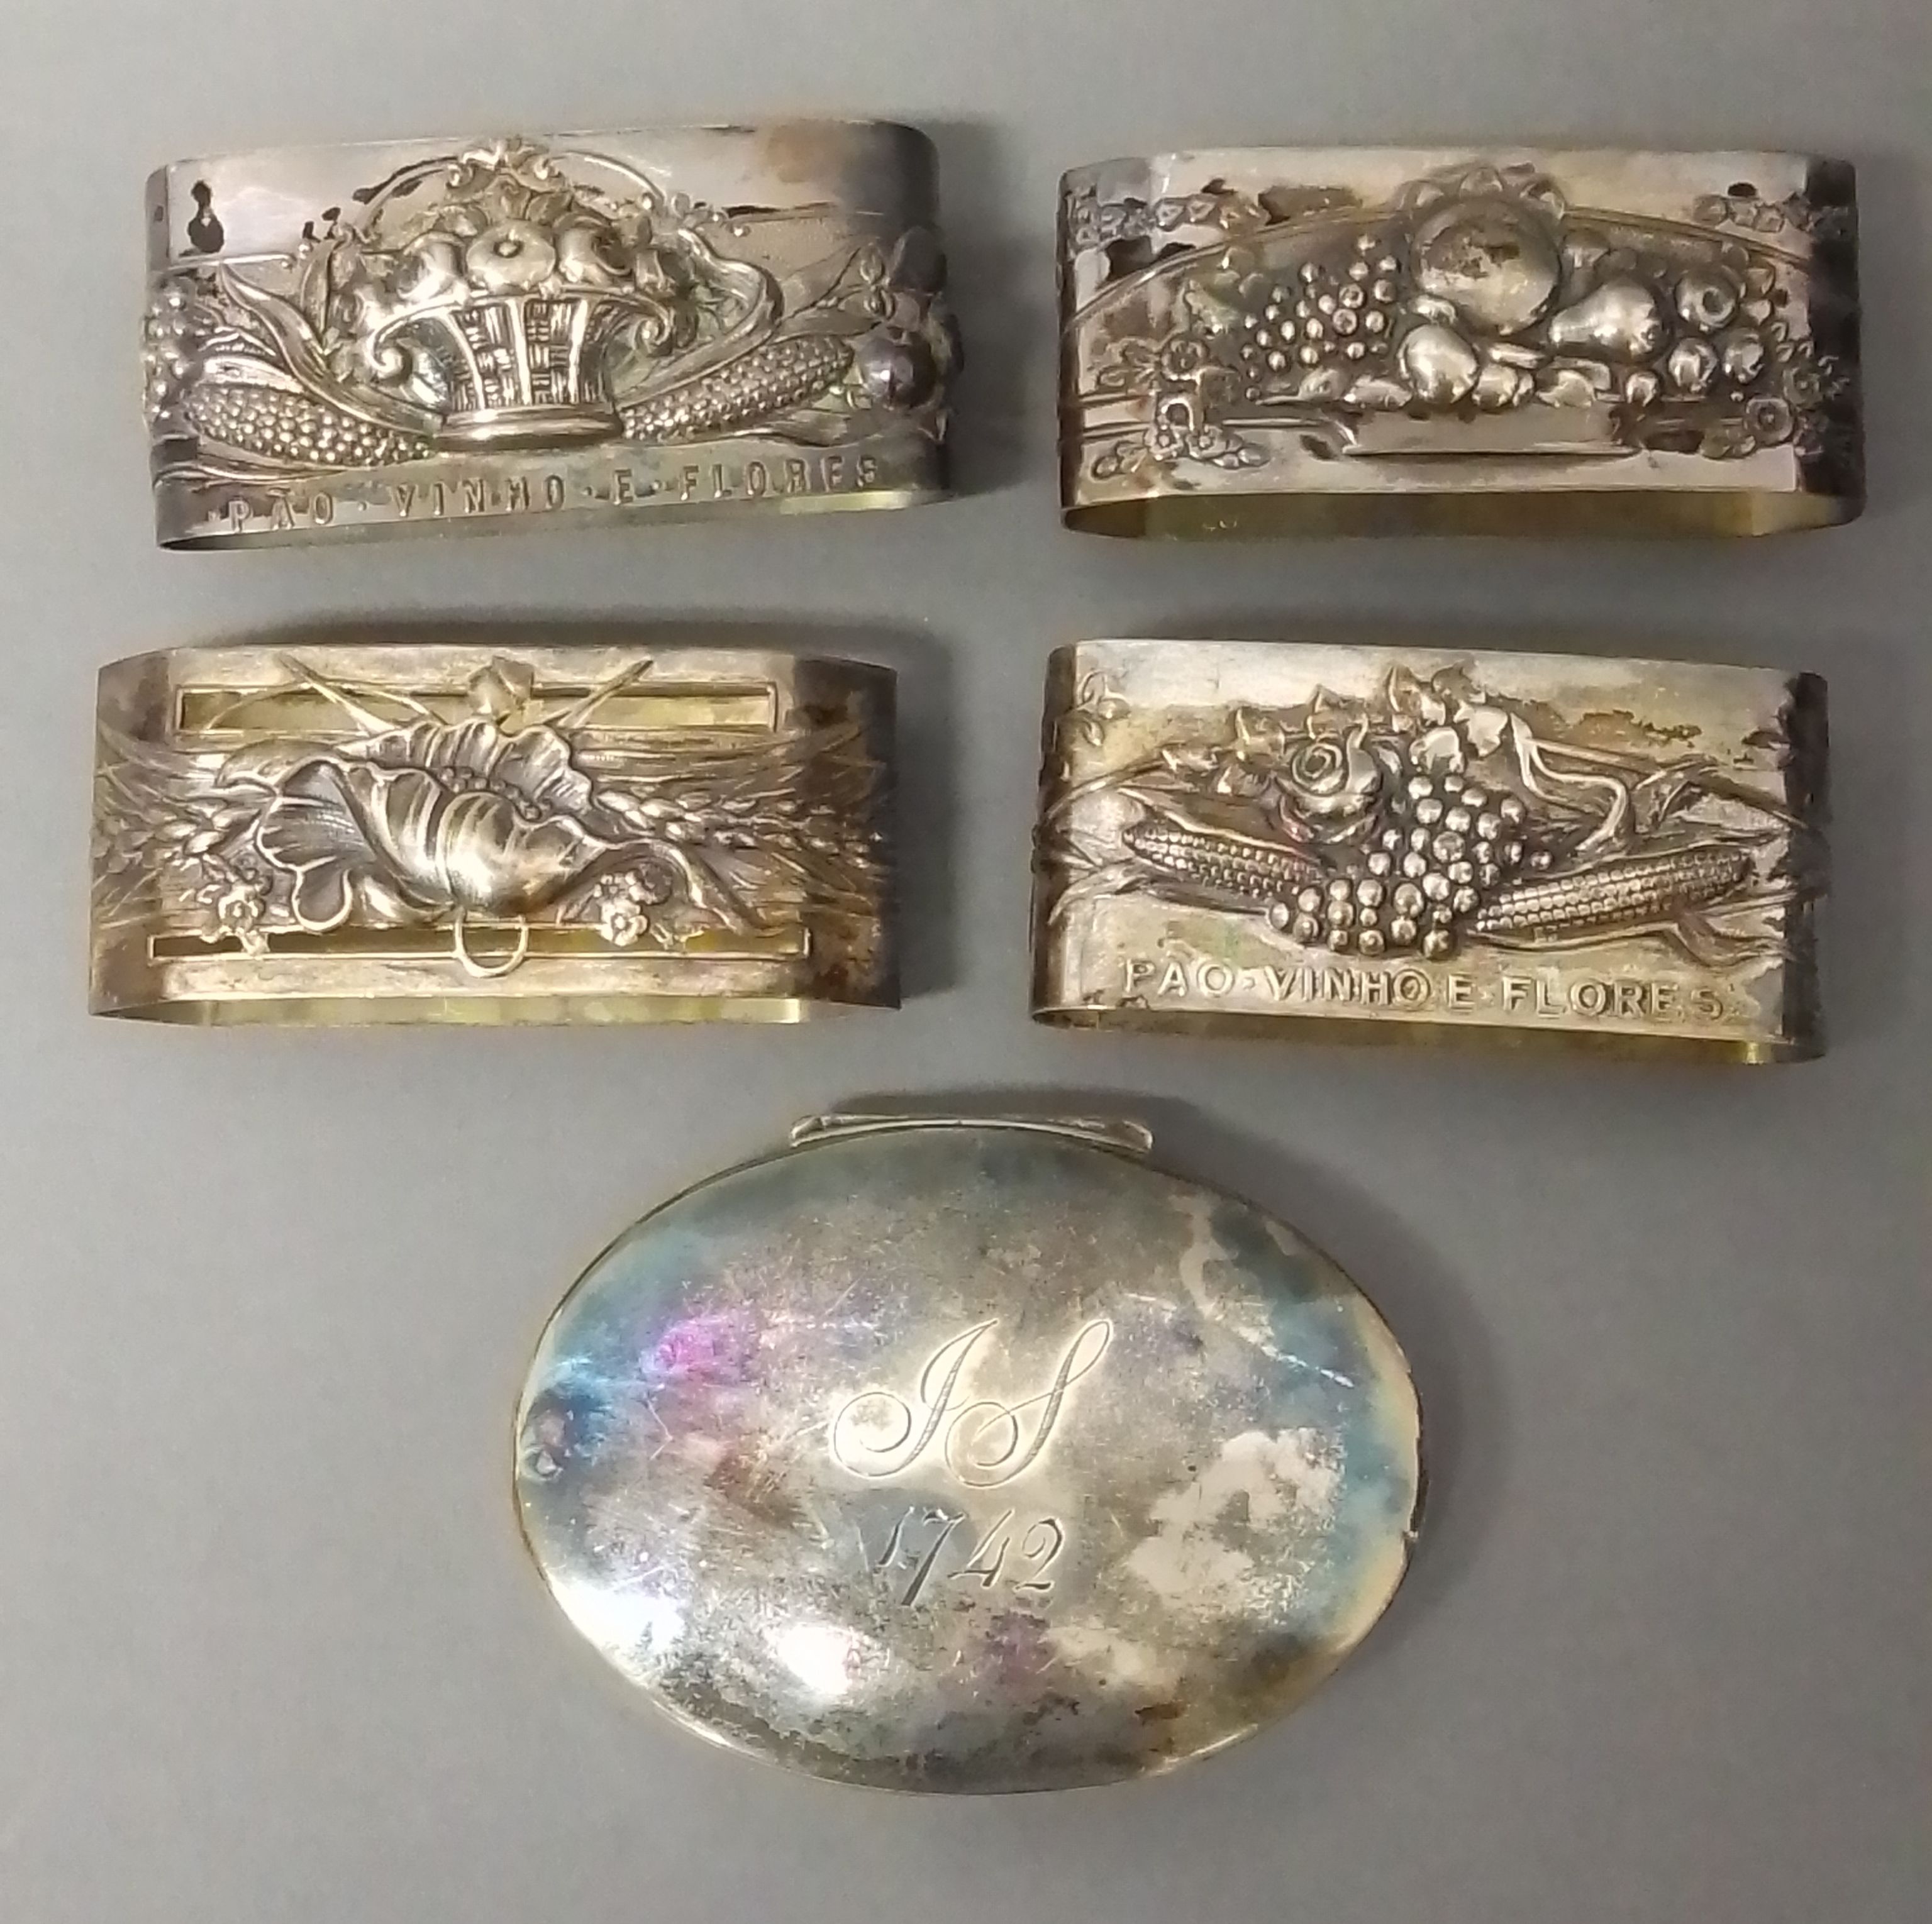 A set of four Portuguese Art Nouveau style silver serviette rings and an 18th century snuff box.